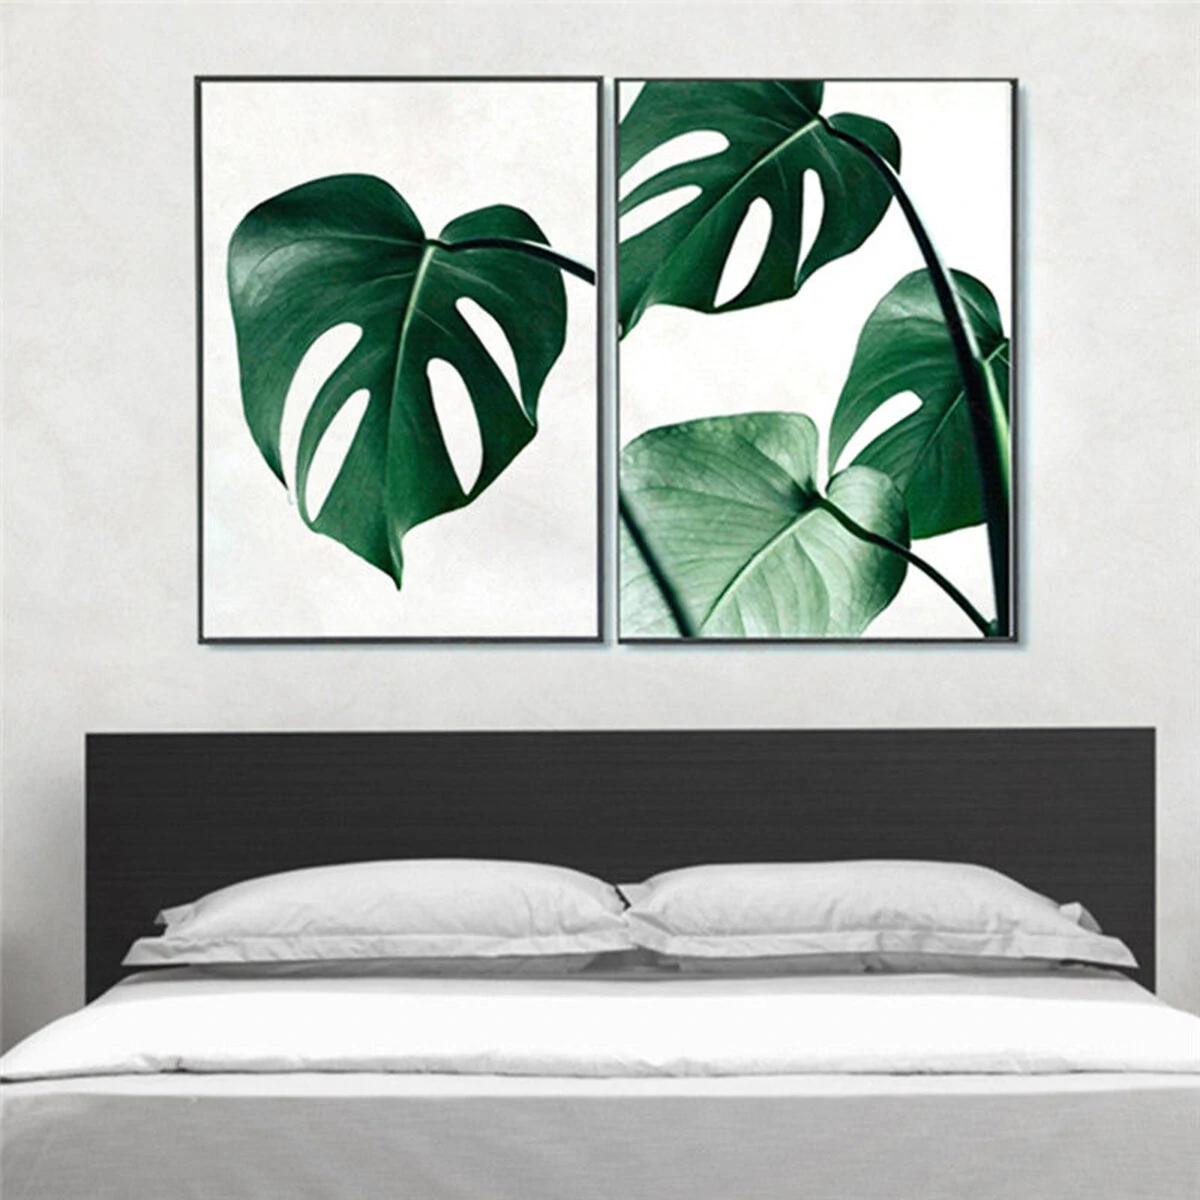 1 piece canvas print painting nordic green plant leaf canvas art poster print wall picture home decor no frame